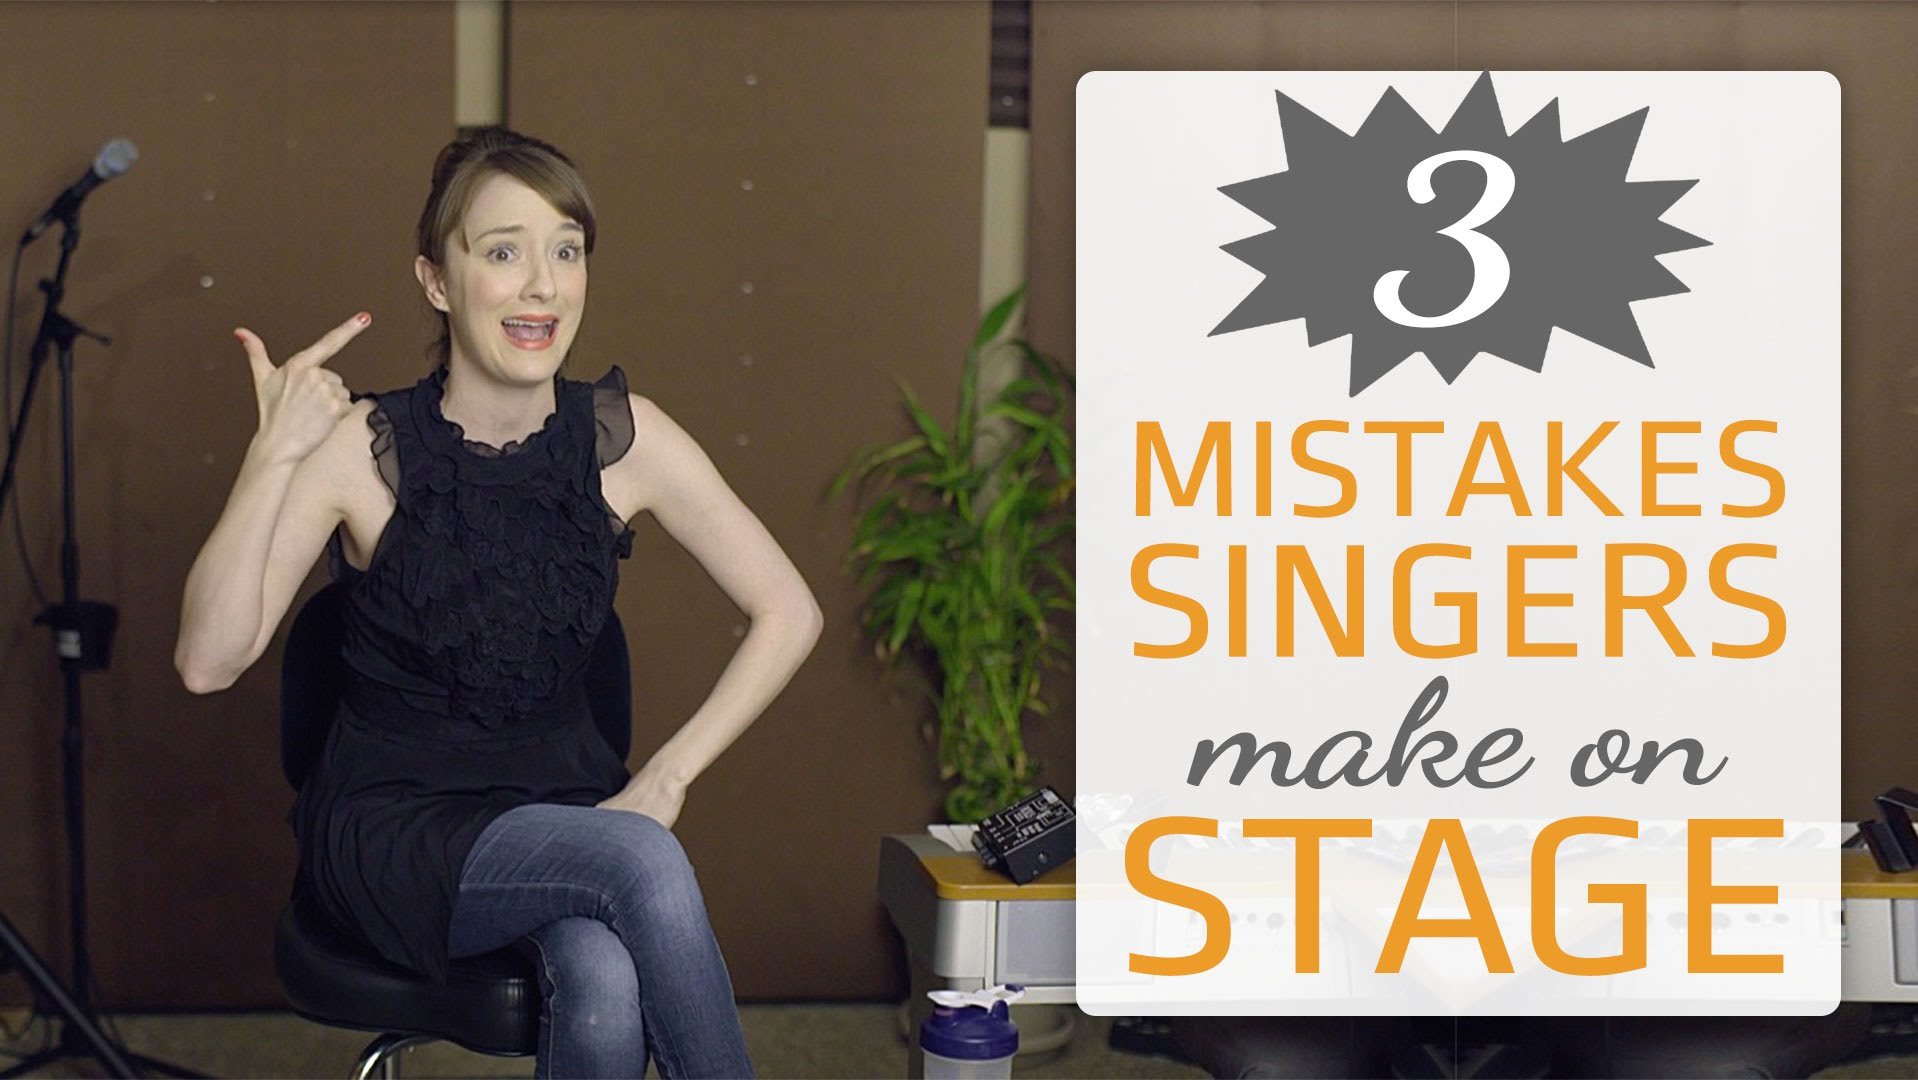 More information about "3 BIG mistakes singers make on stage"